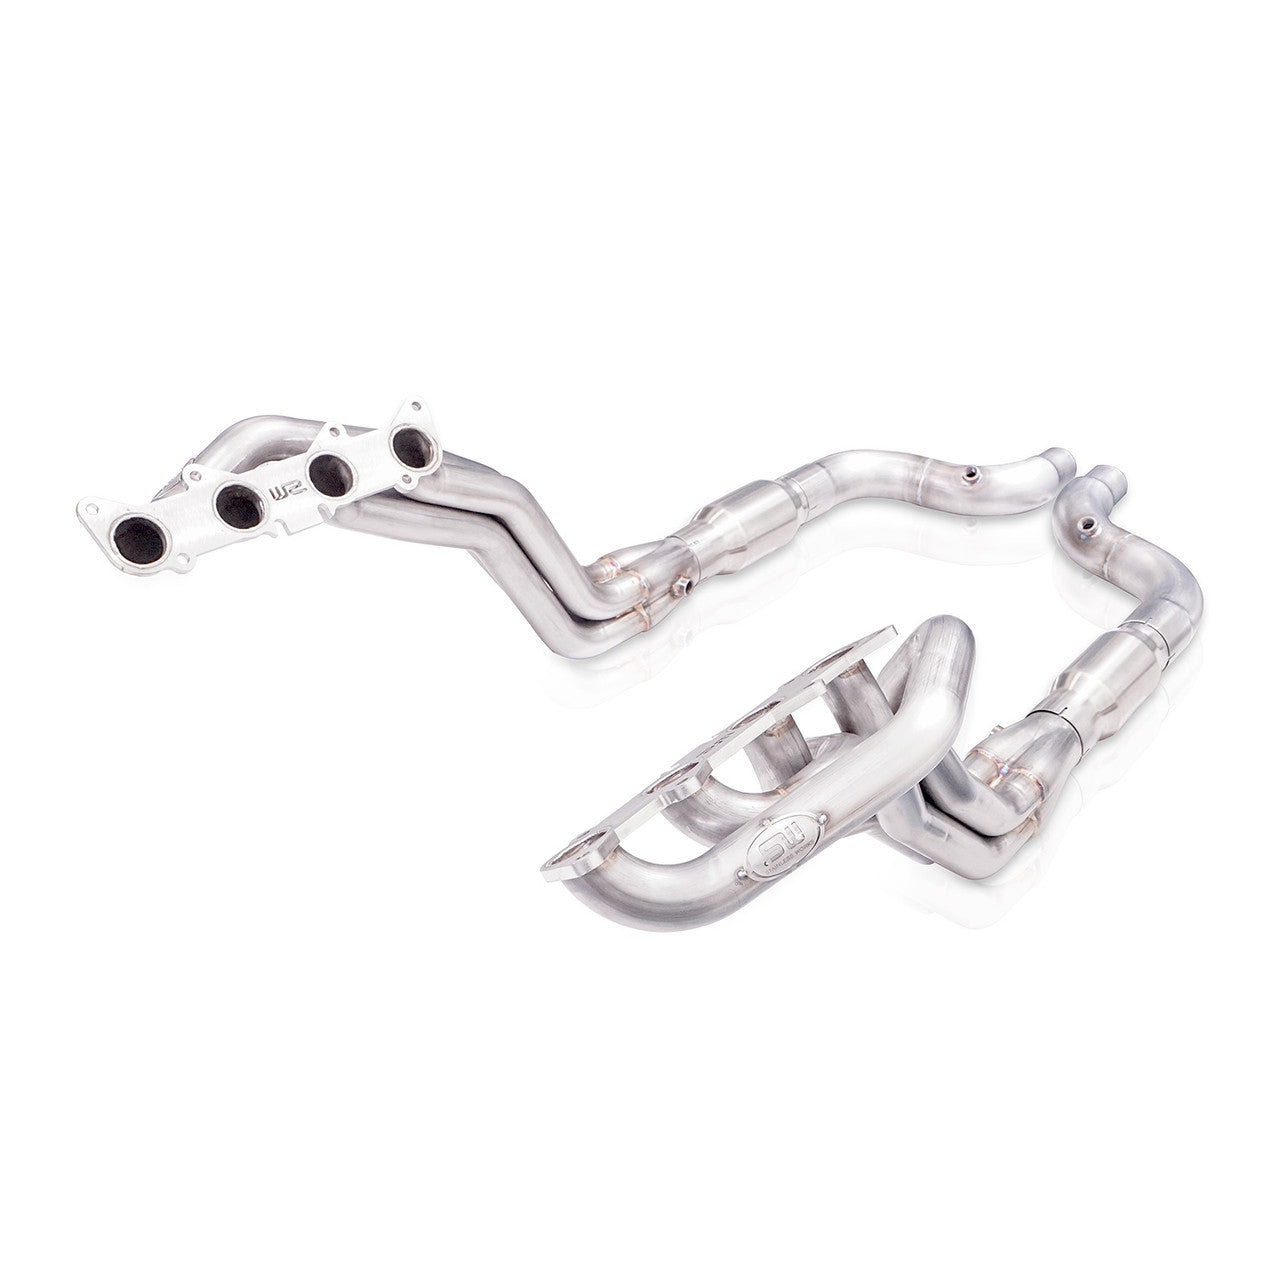 Stainless Works 2015-16 Mustang GT Headers 1-7/8in Primaries 3in High-Flow Cats Factory Connection